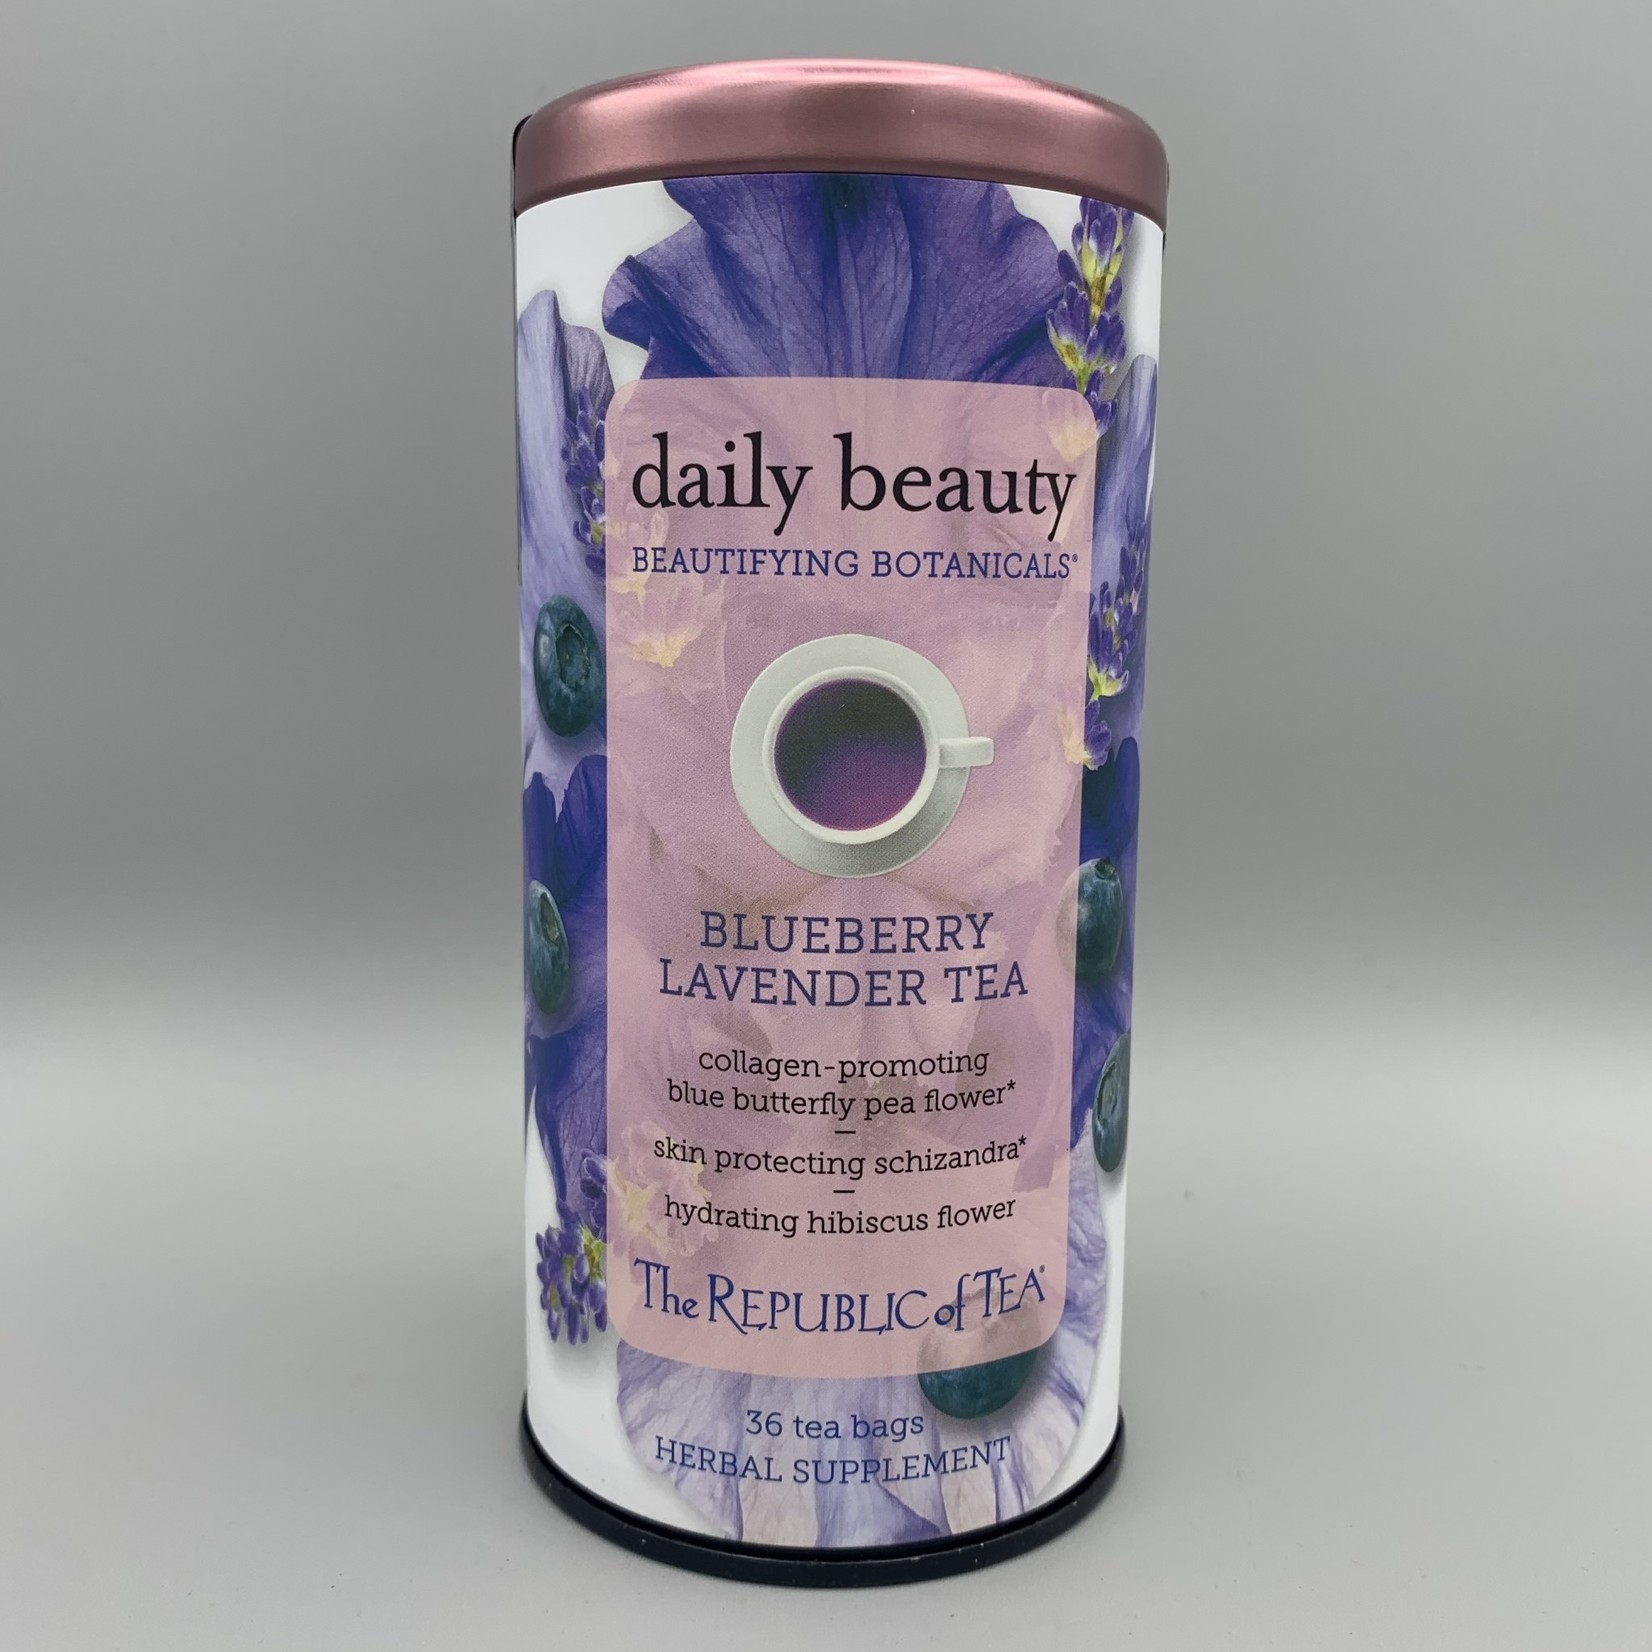 The Republic of Tea The Republic of Tea Daily Beauty Blueberry Lavender Herbal Tea (36 Bags)